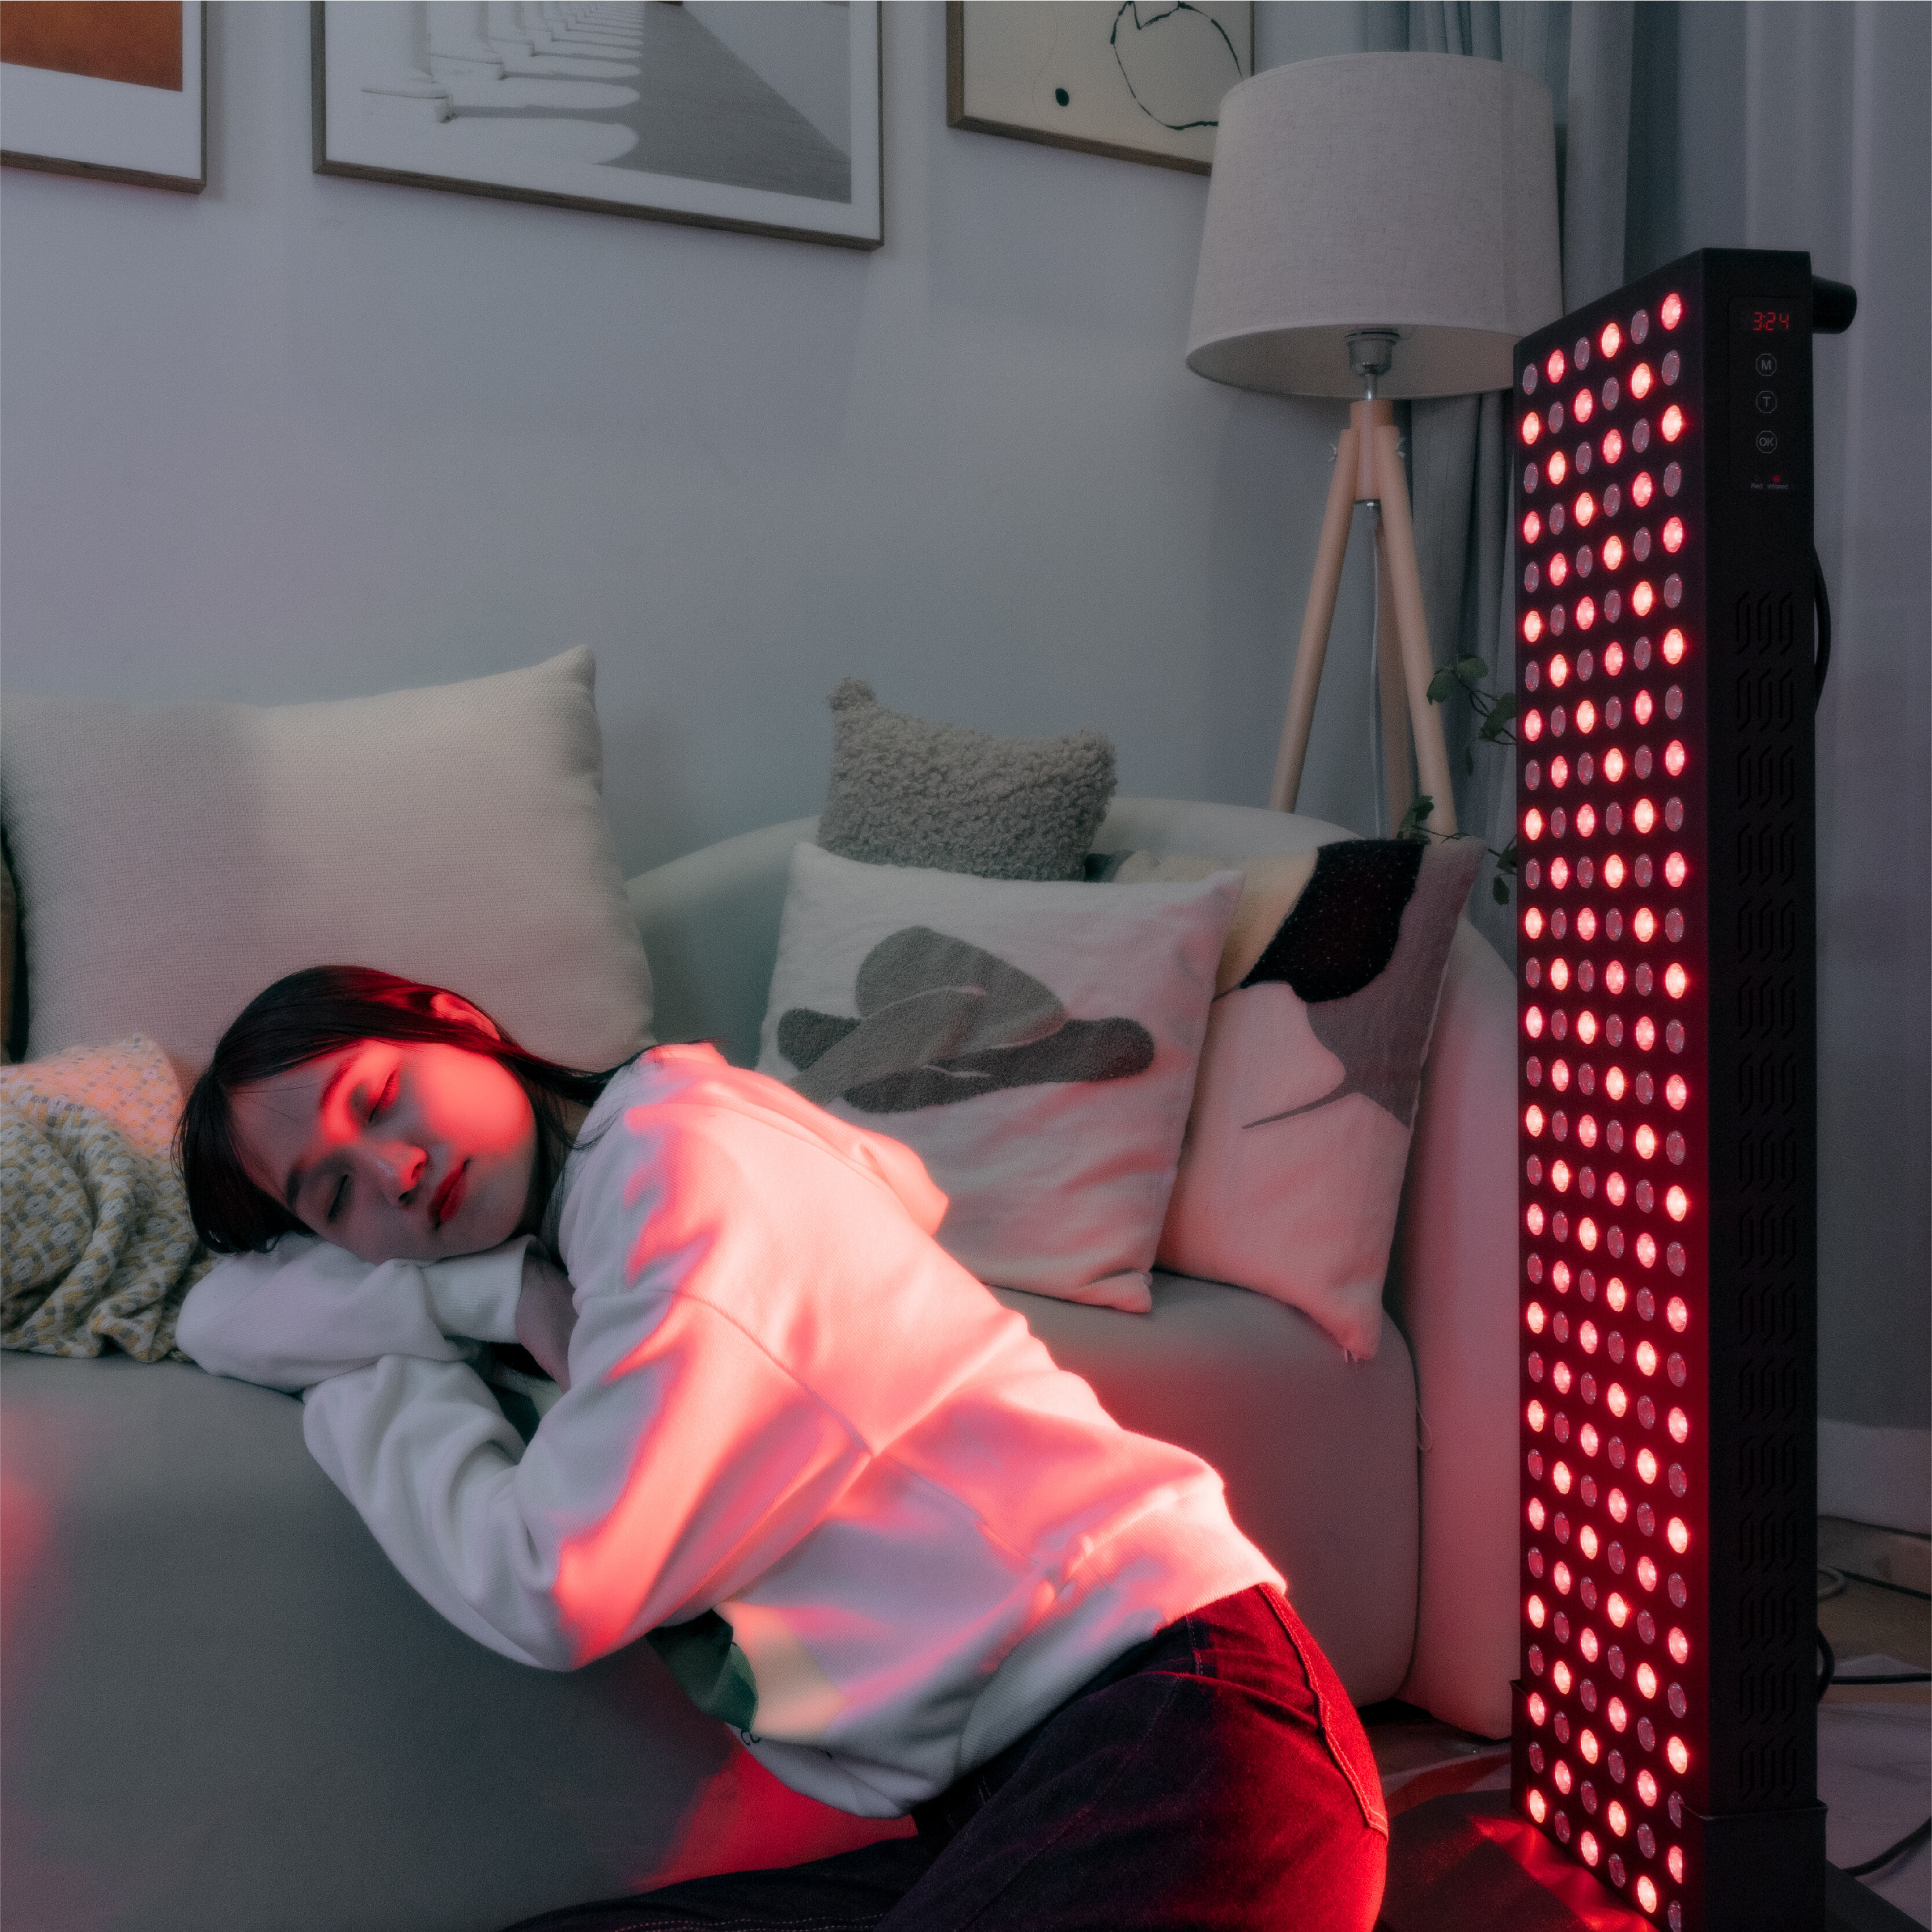 fda approved infrared light therapy devices, fda approved infrared light therapy, fda-approved infrared light therapy devices, infrared light therapy fda approved, medical grade fda approved infrared light therapy